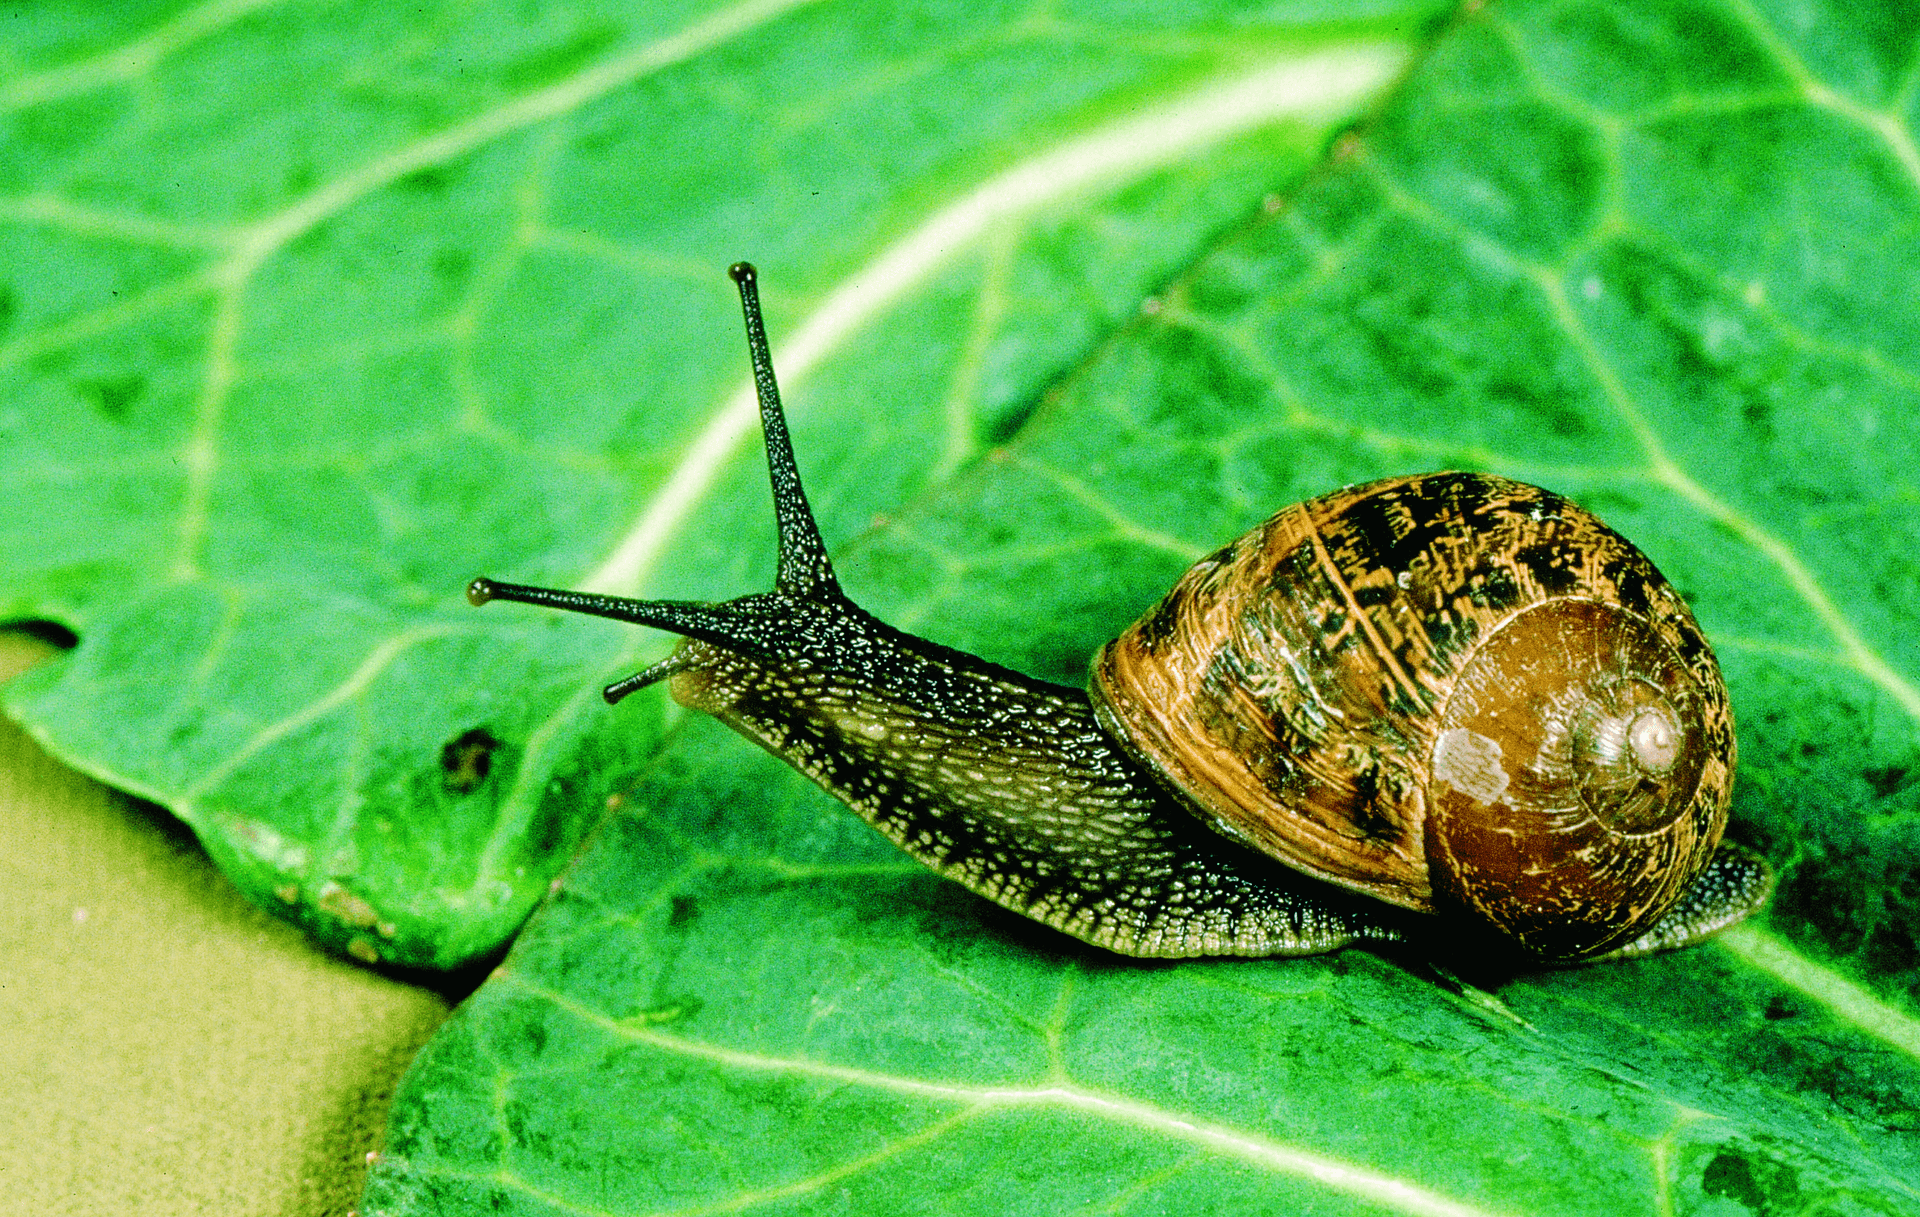 A brown snail crawls across the forest floor.